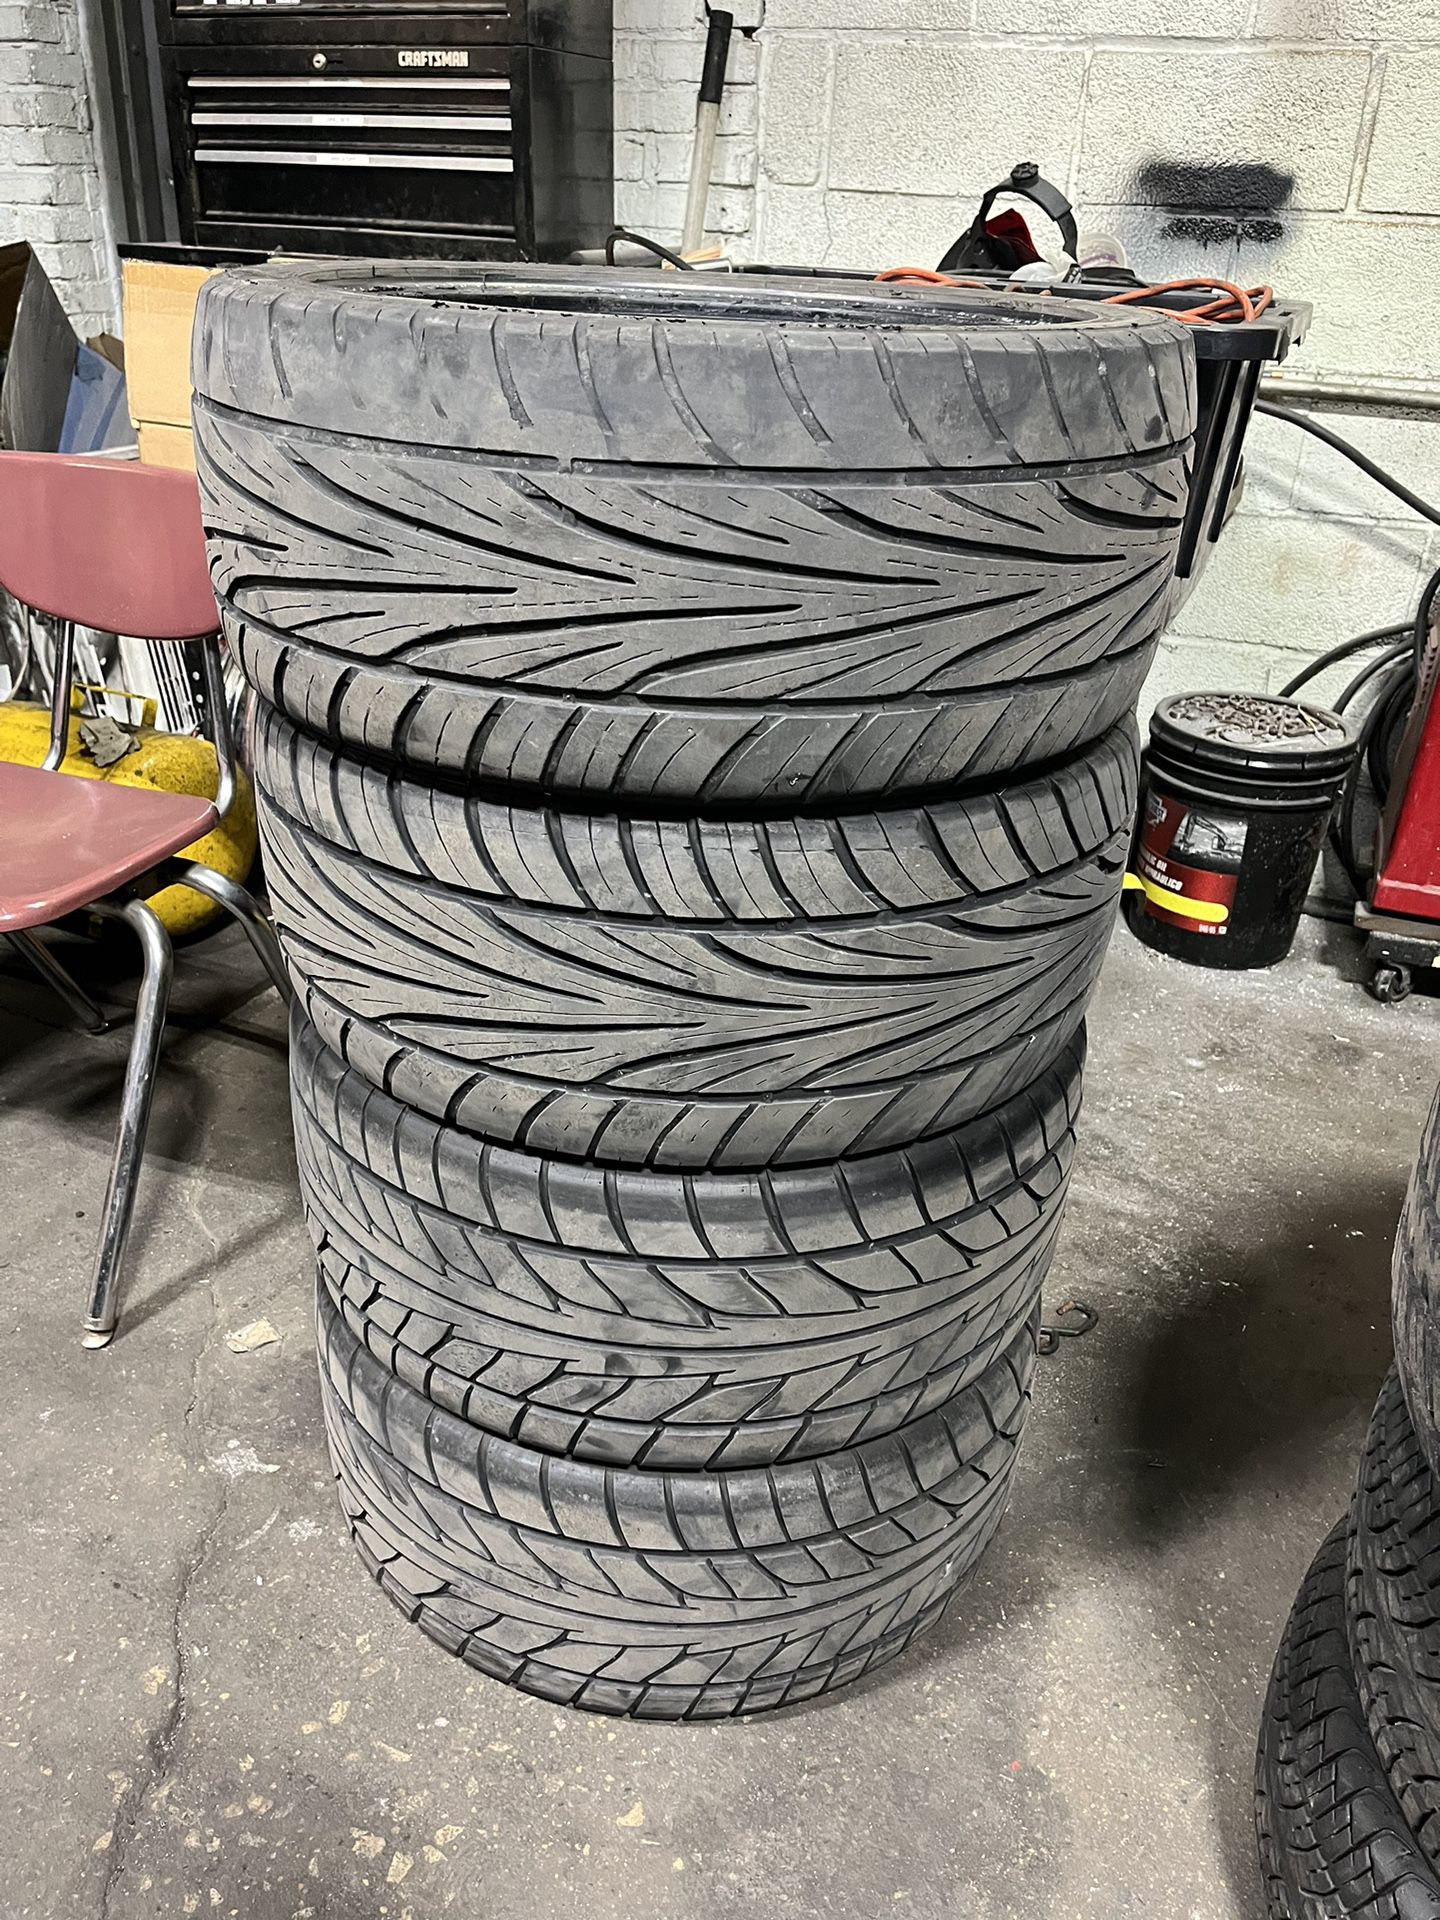 4 Good Used Tires 2 245/40/18 2 285/35/18 $50 Each Mounted Balanced